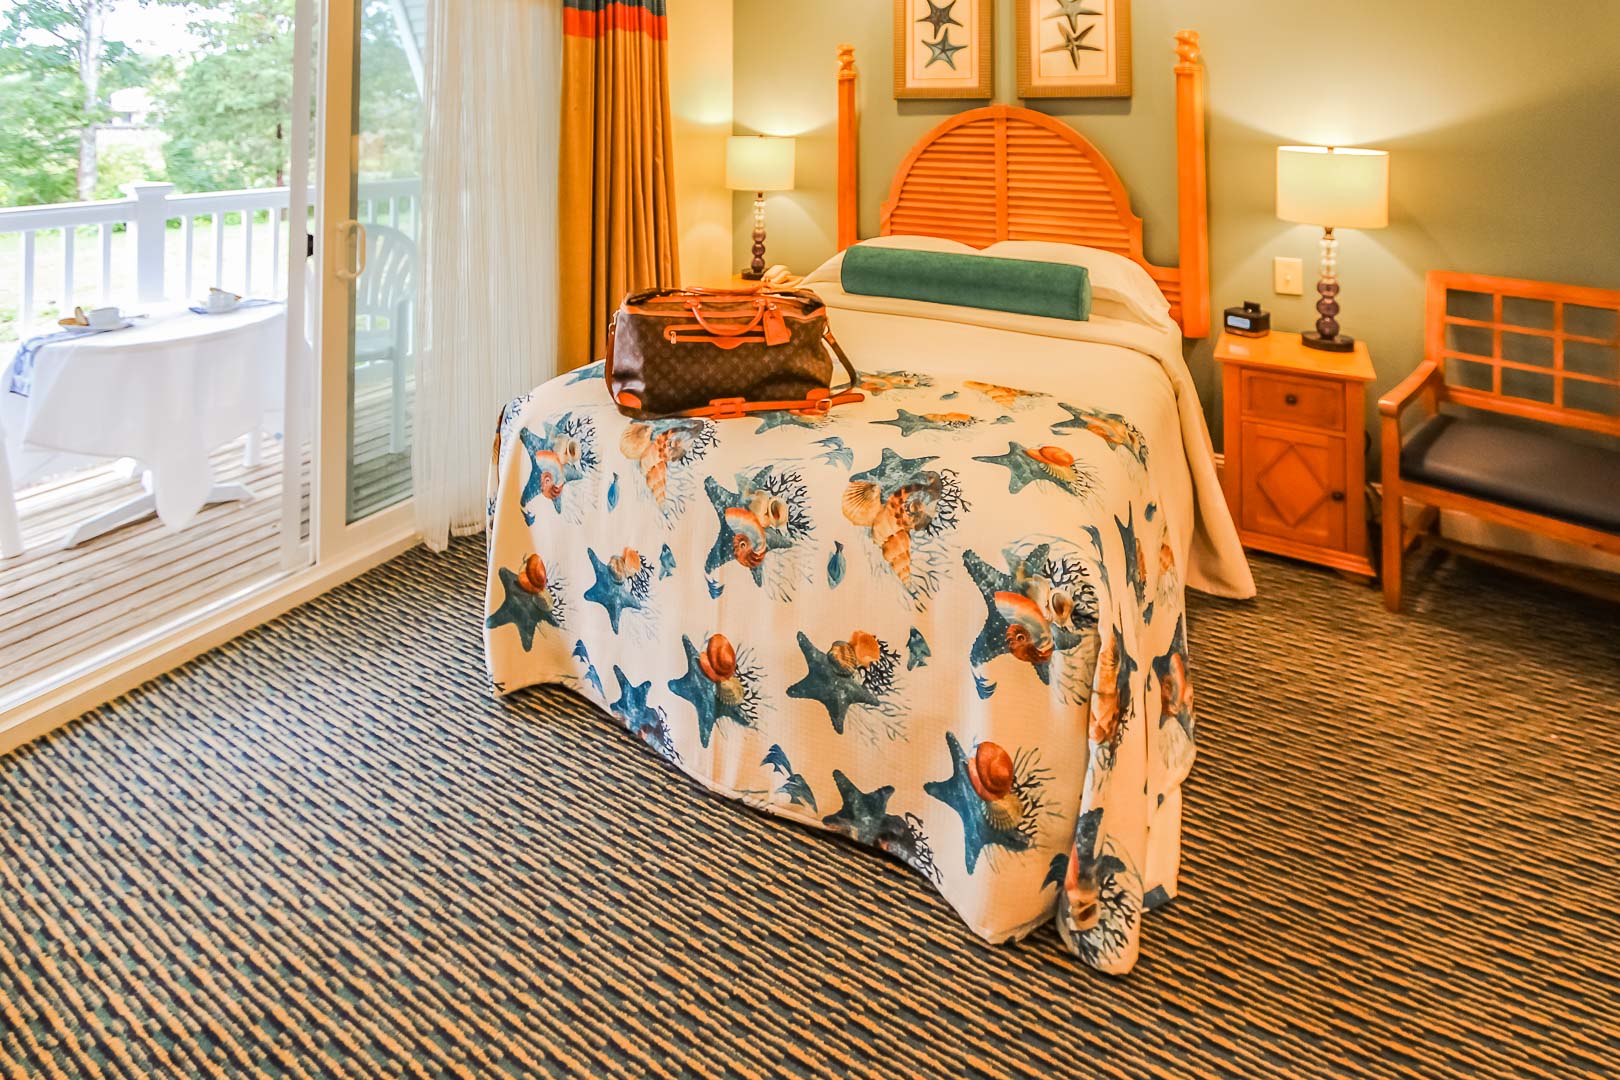 A vibrant bedroom at VRI's The Cove at Yarmouth in Massachusetts.